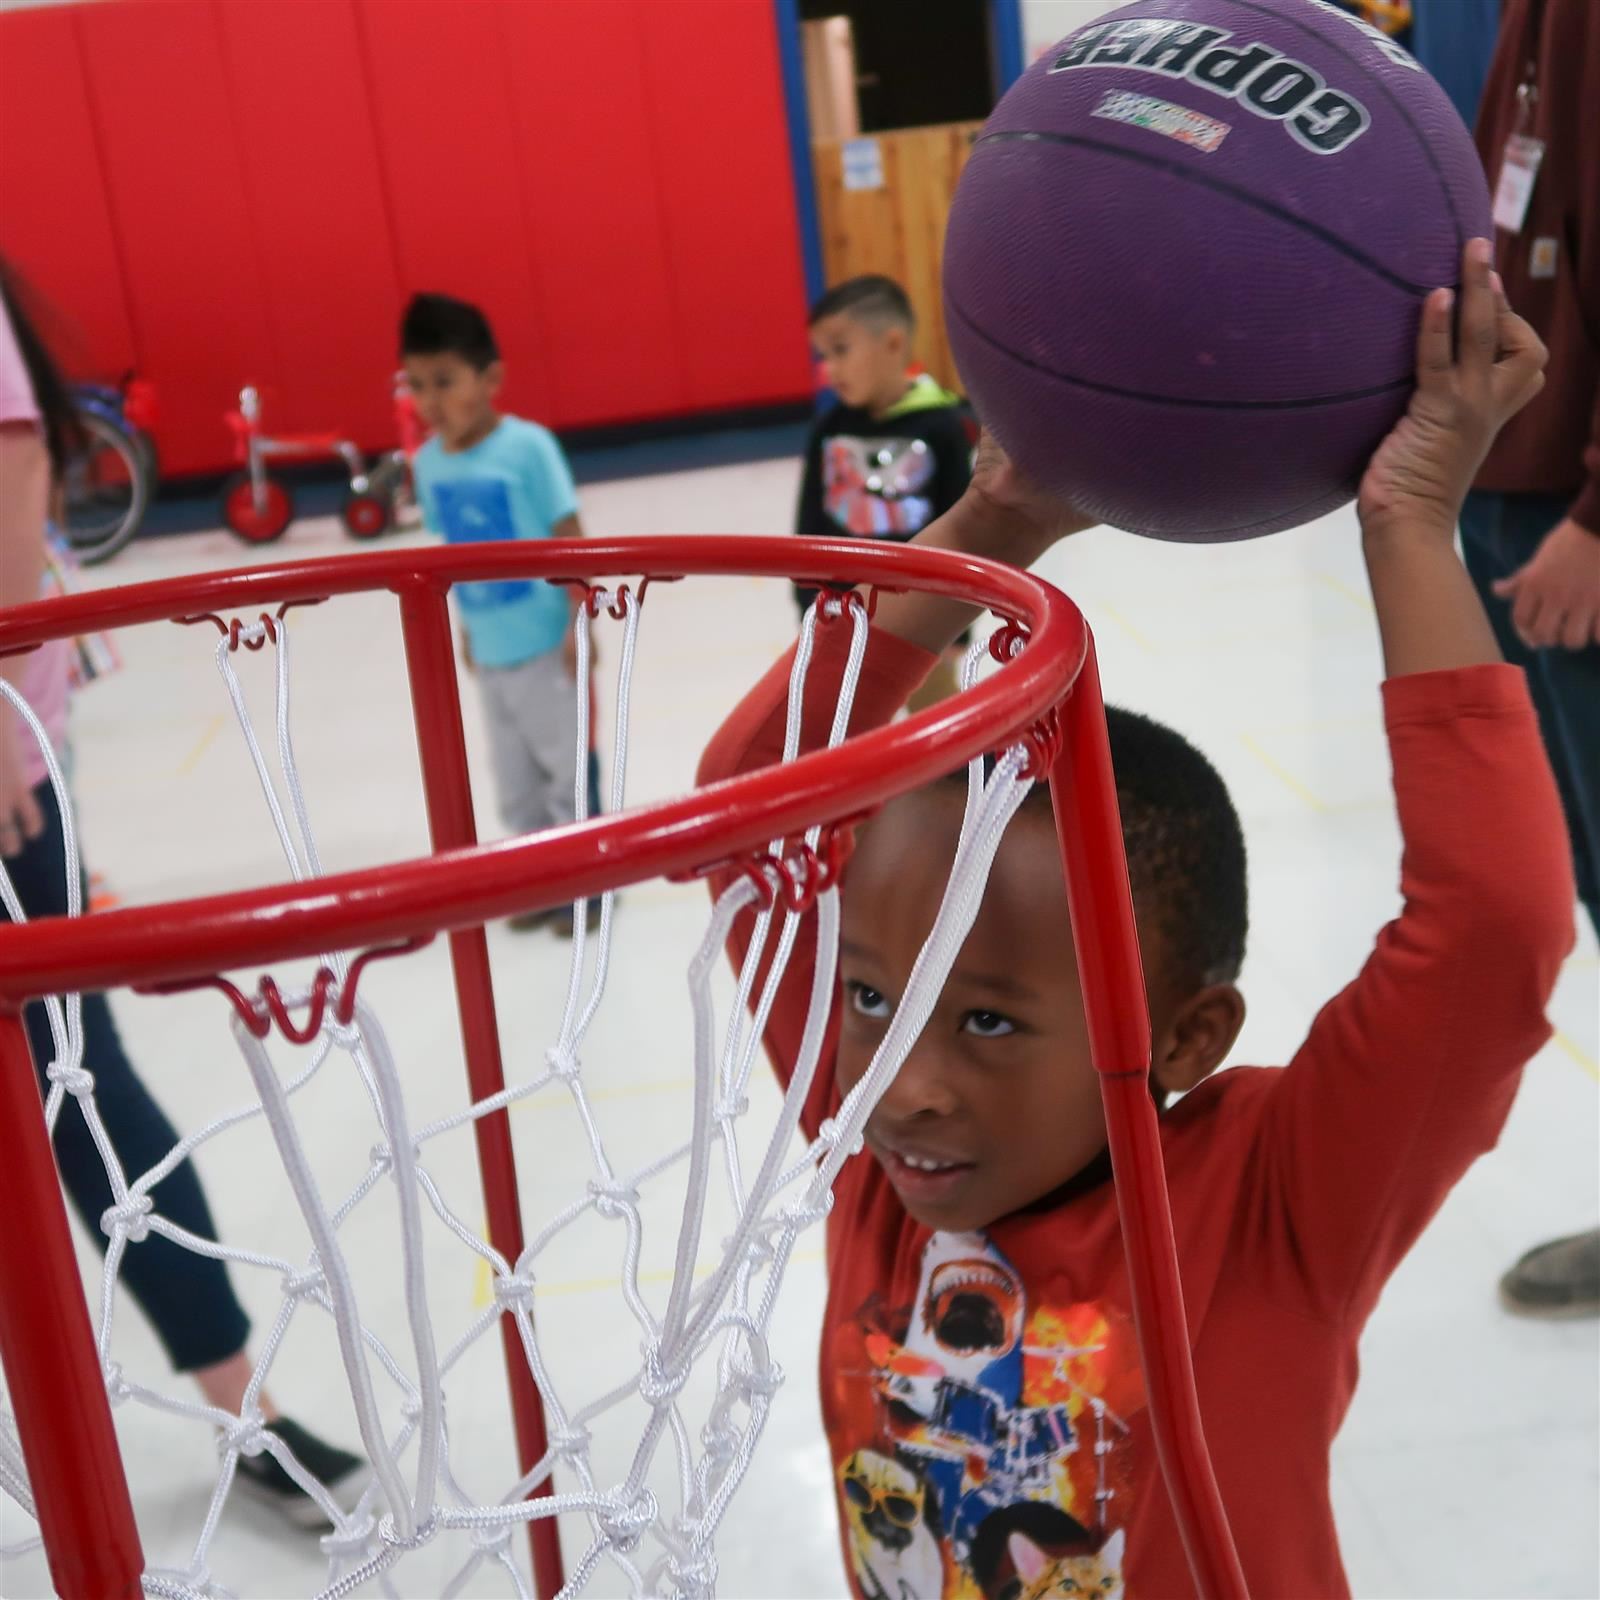  Preschoolers are playing hoops again, thanks to 2 GHS assists